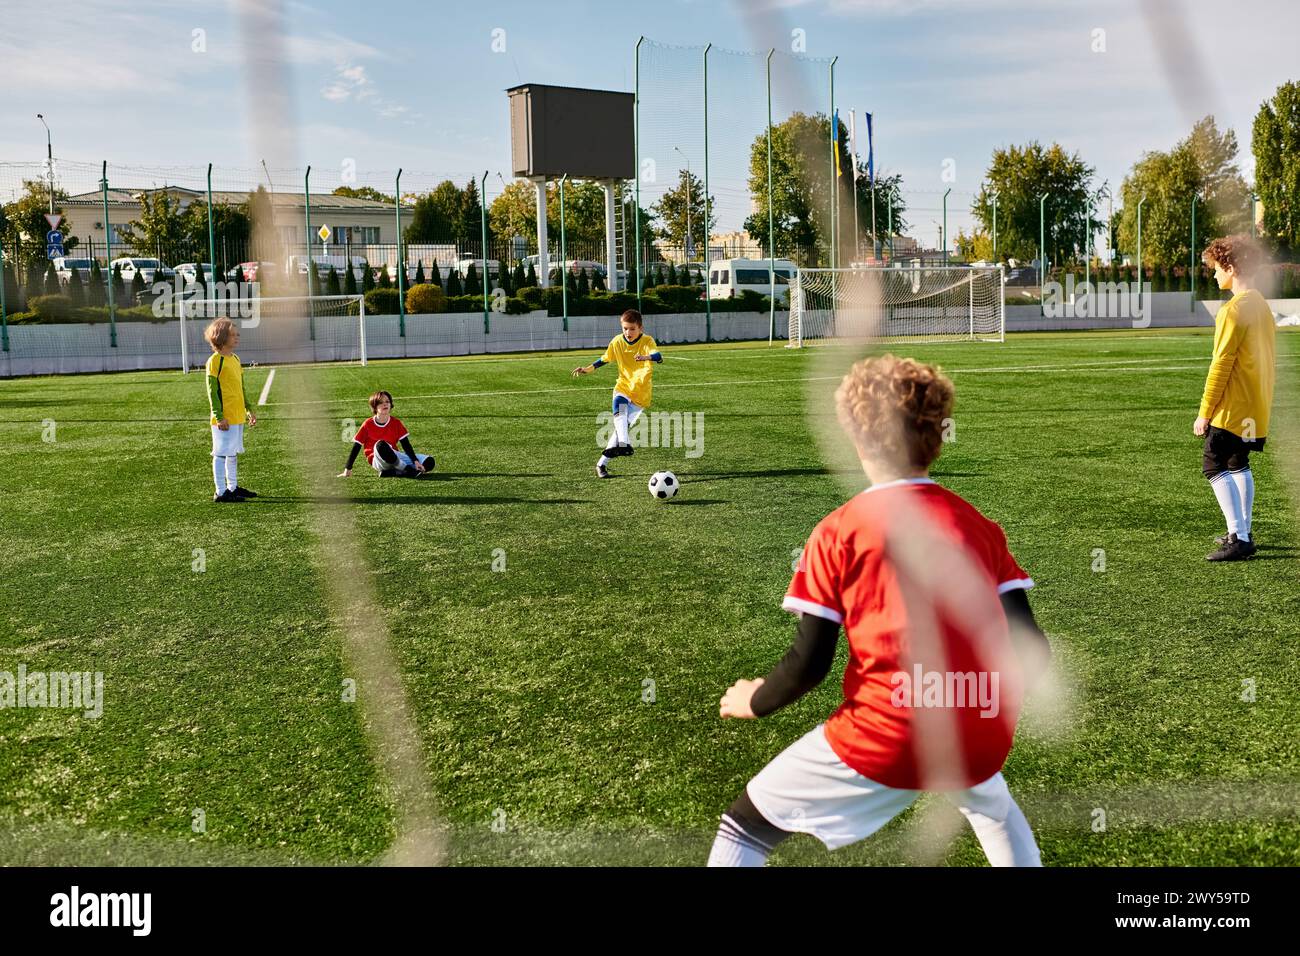 A group of young children are playing an energetic game of soccer on a grassy field. They are running, passing, and kicking the ball with excitement a Stock Photo